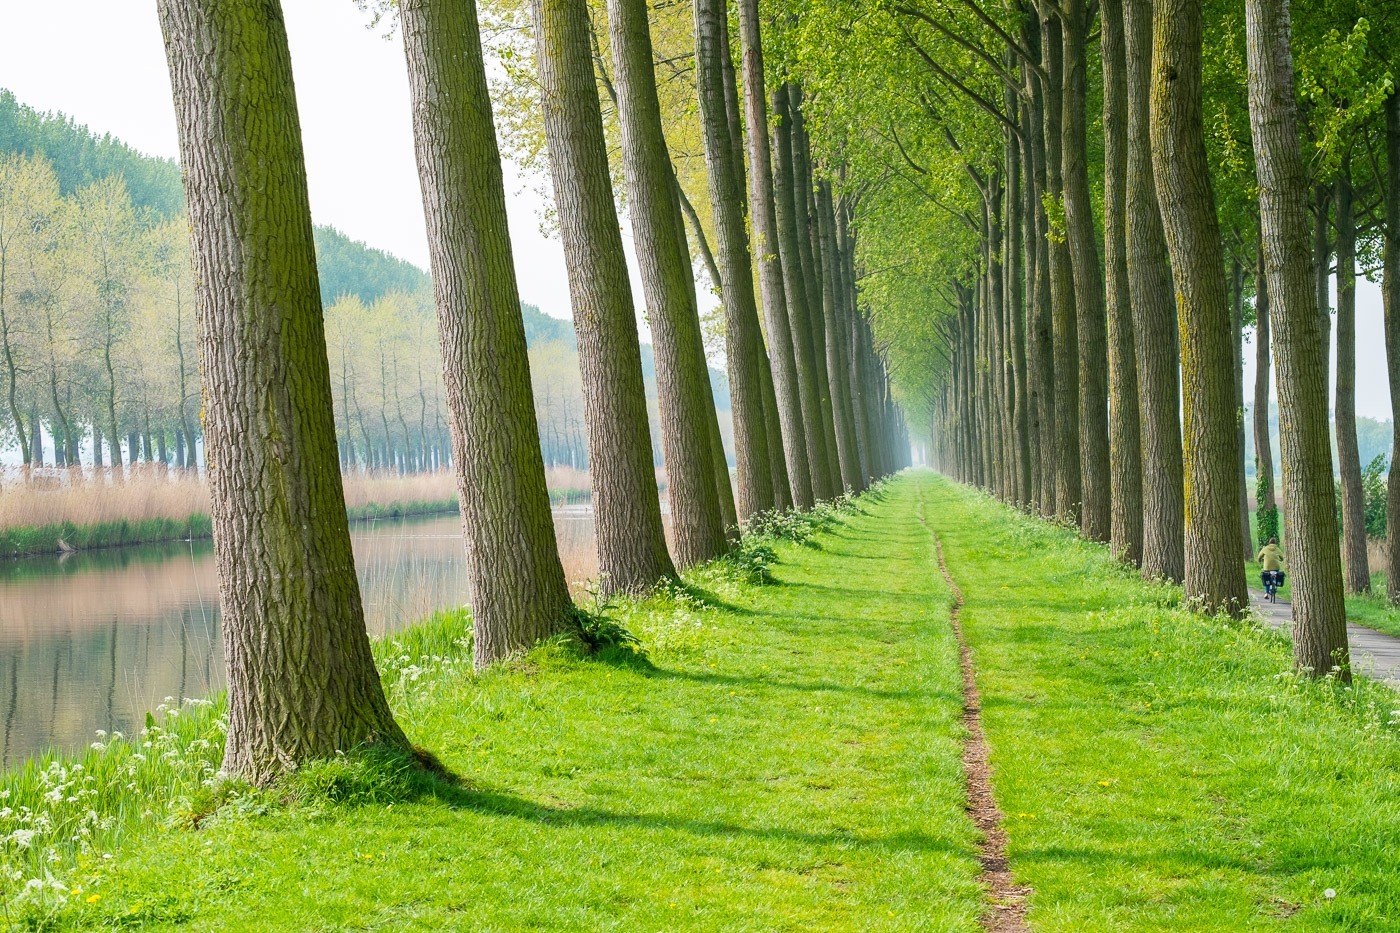 Rows of trees along a canal in spring